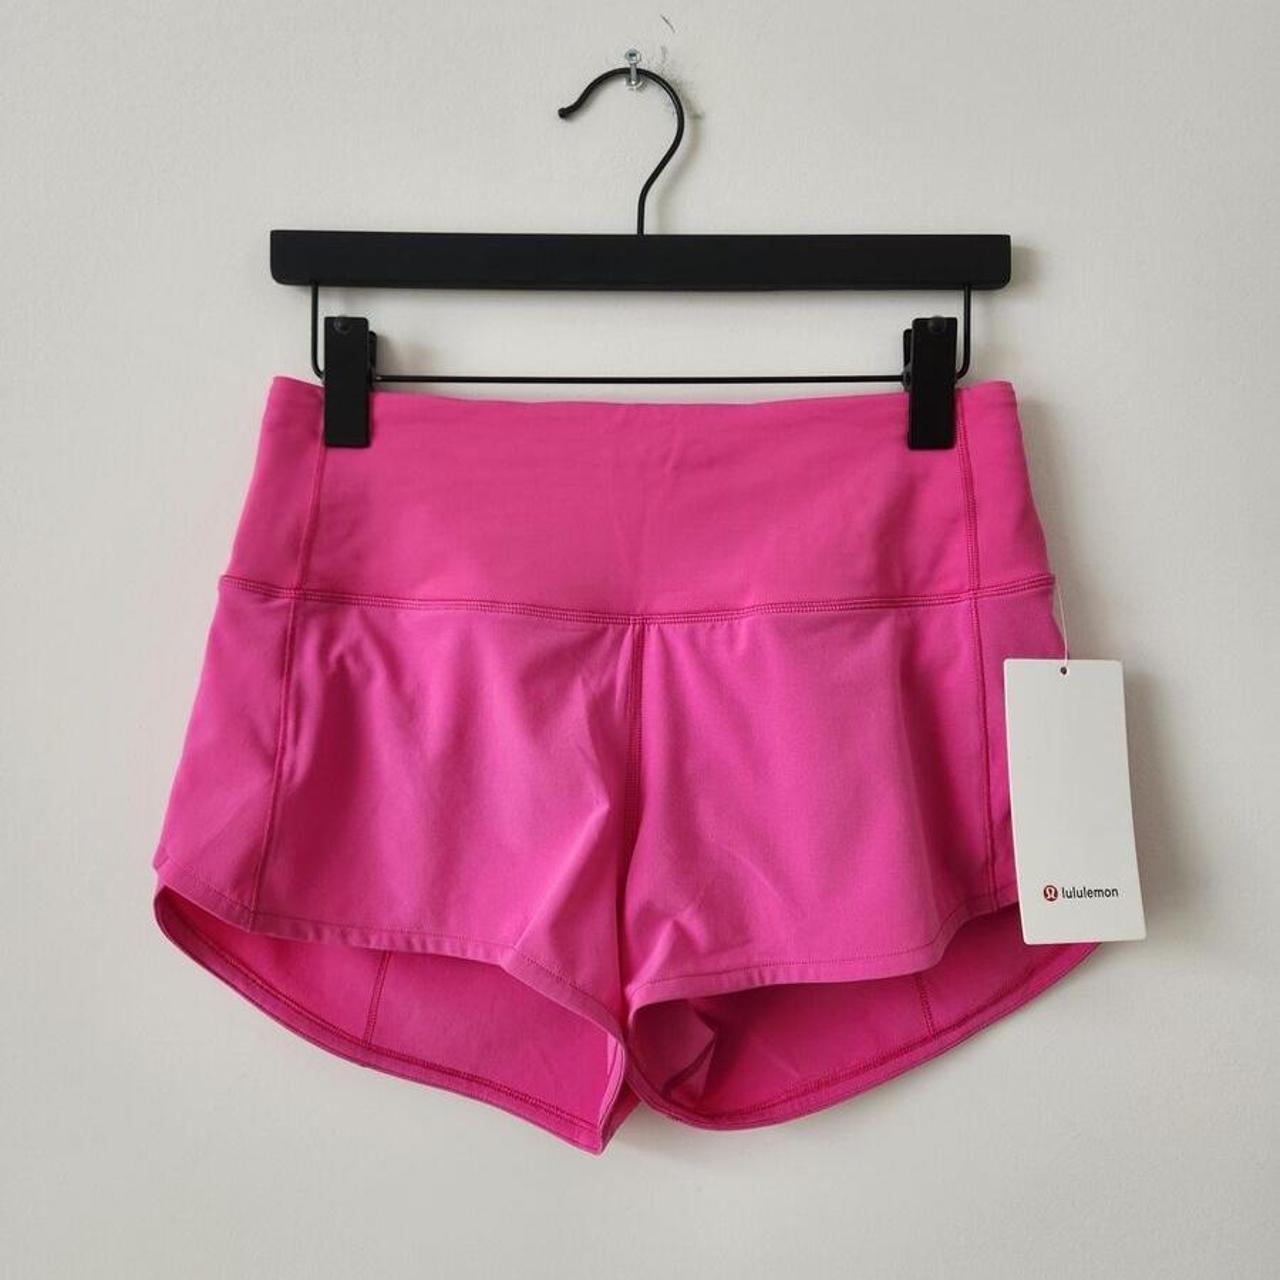 LULULEMON Hotty hot shorts in sonic pink, 2.5 inch